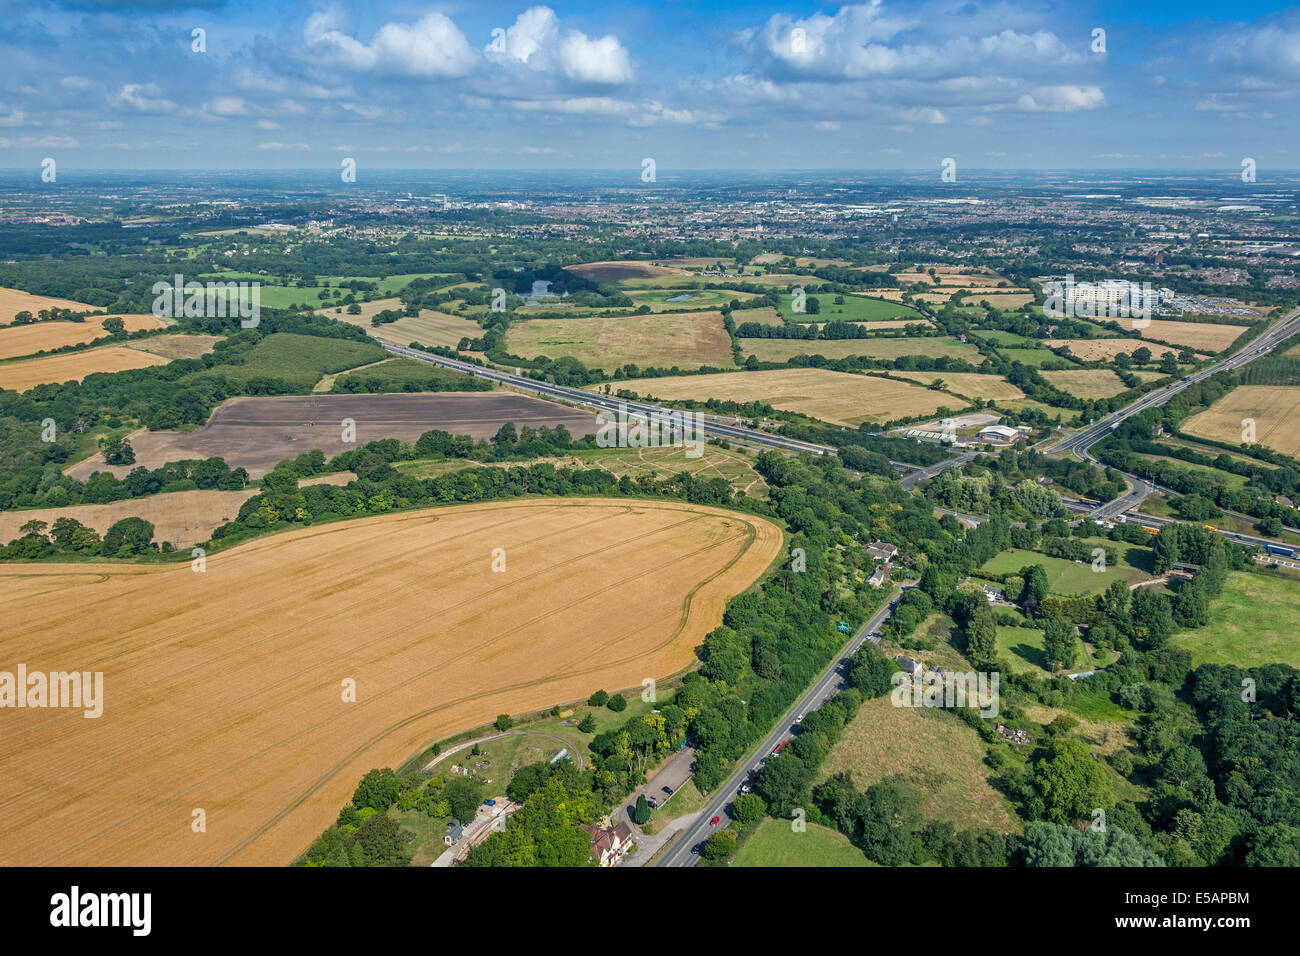 Aerial view towards Swindon and Junction 15 of the M4 Motorway, near Swindon, Wiltshire, UK. JMH6219 Stock Photo